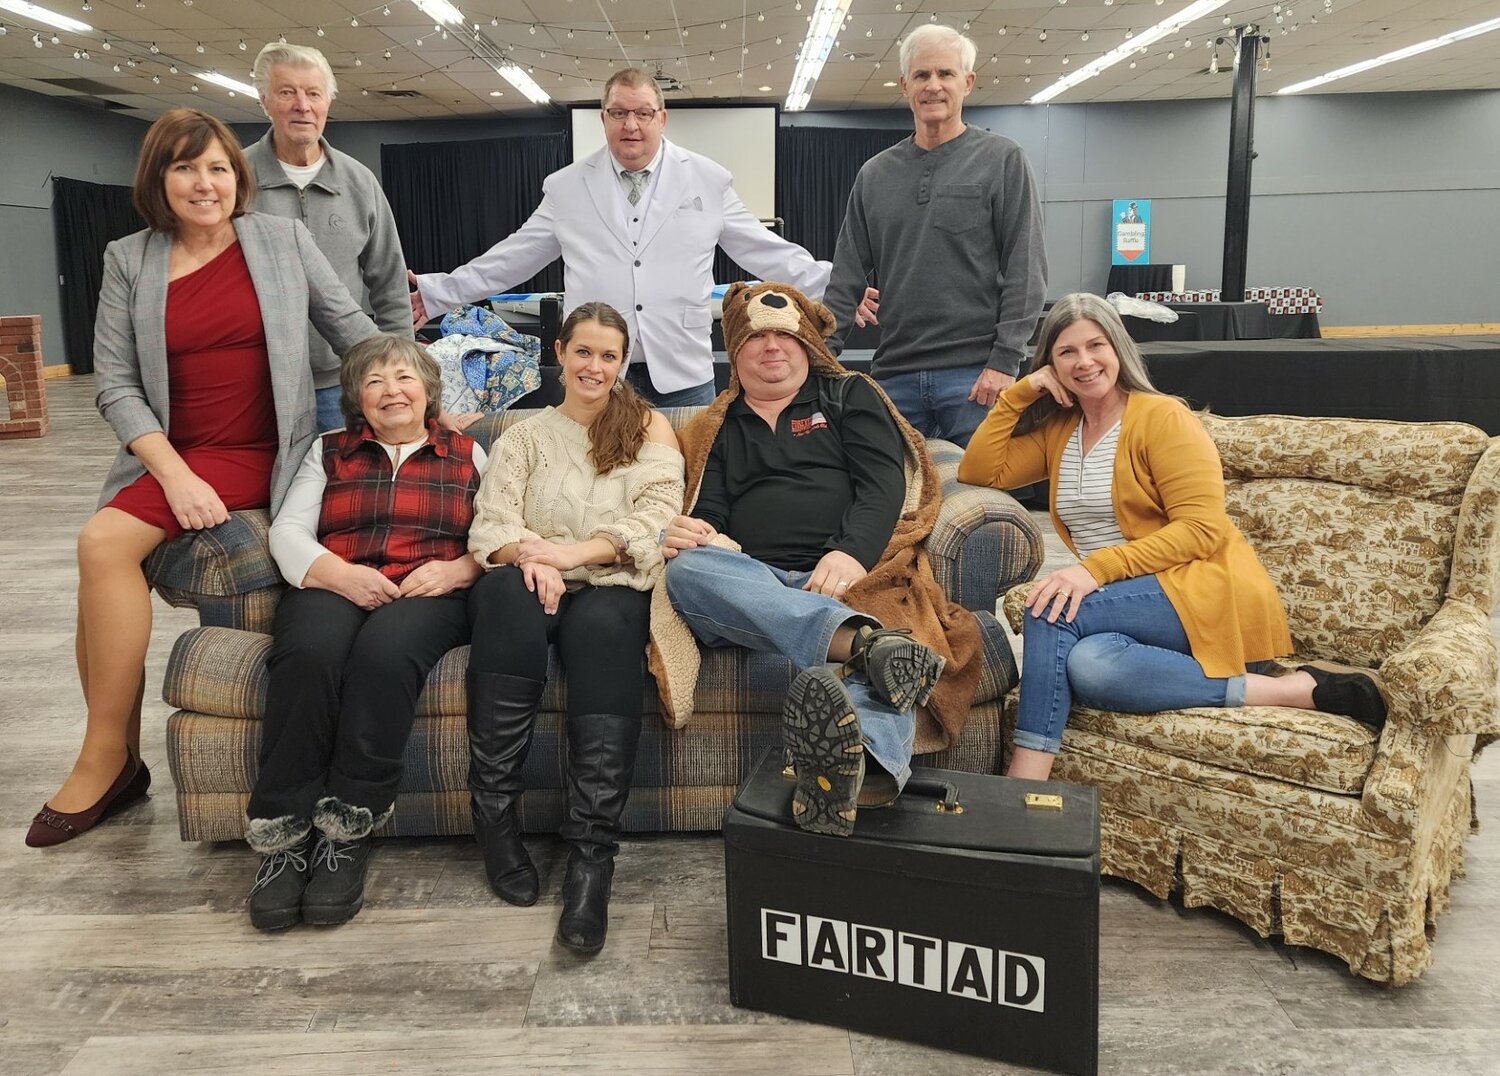 The cast of the Great River Road Theatre’s “Sin, Sex and the CIA” practice at The Old Ptacek’s Event Center. Pictured are (front, from left) Rebecca Denn, Judy Johnson, Krista Christiansen, Mark Andrle, Missy Kowalchyk; (back) Ken Roen, Aaron Denn, Scott Halverson. Not pictured: Marie-Anne Haudegand-Deiss.